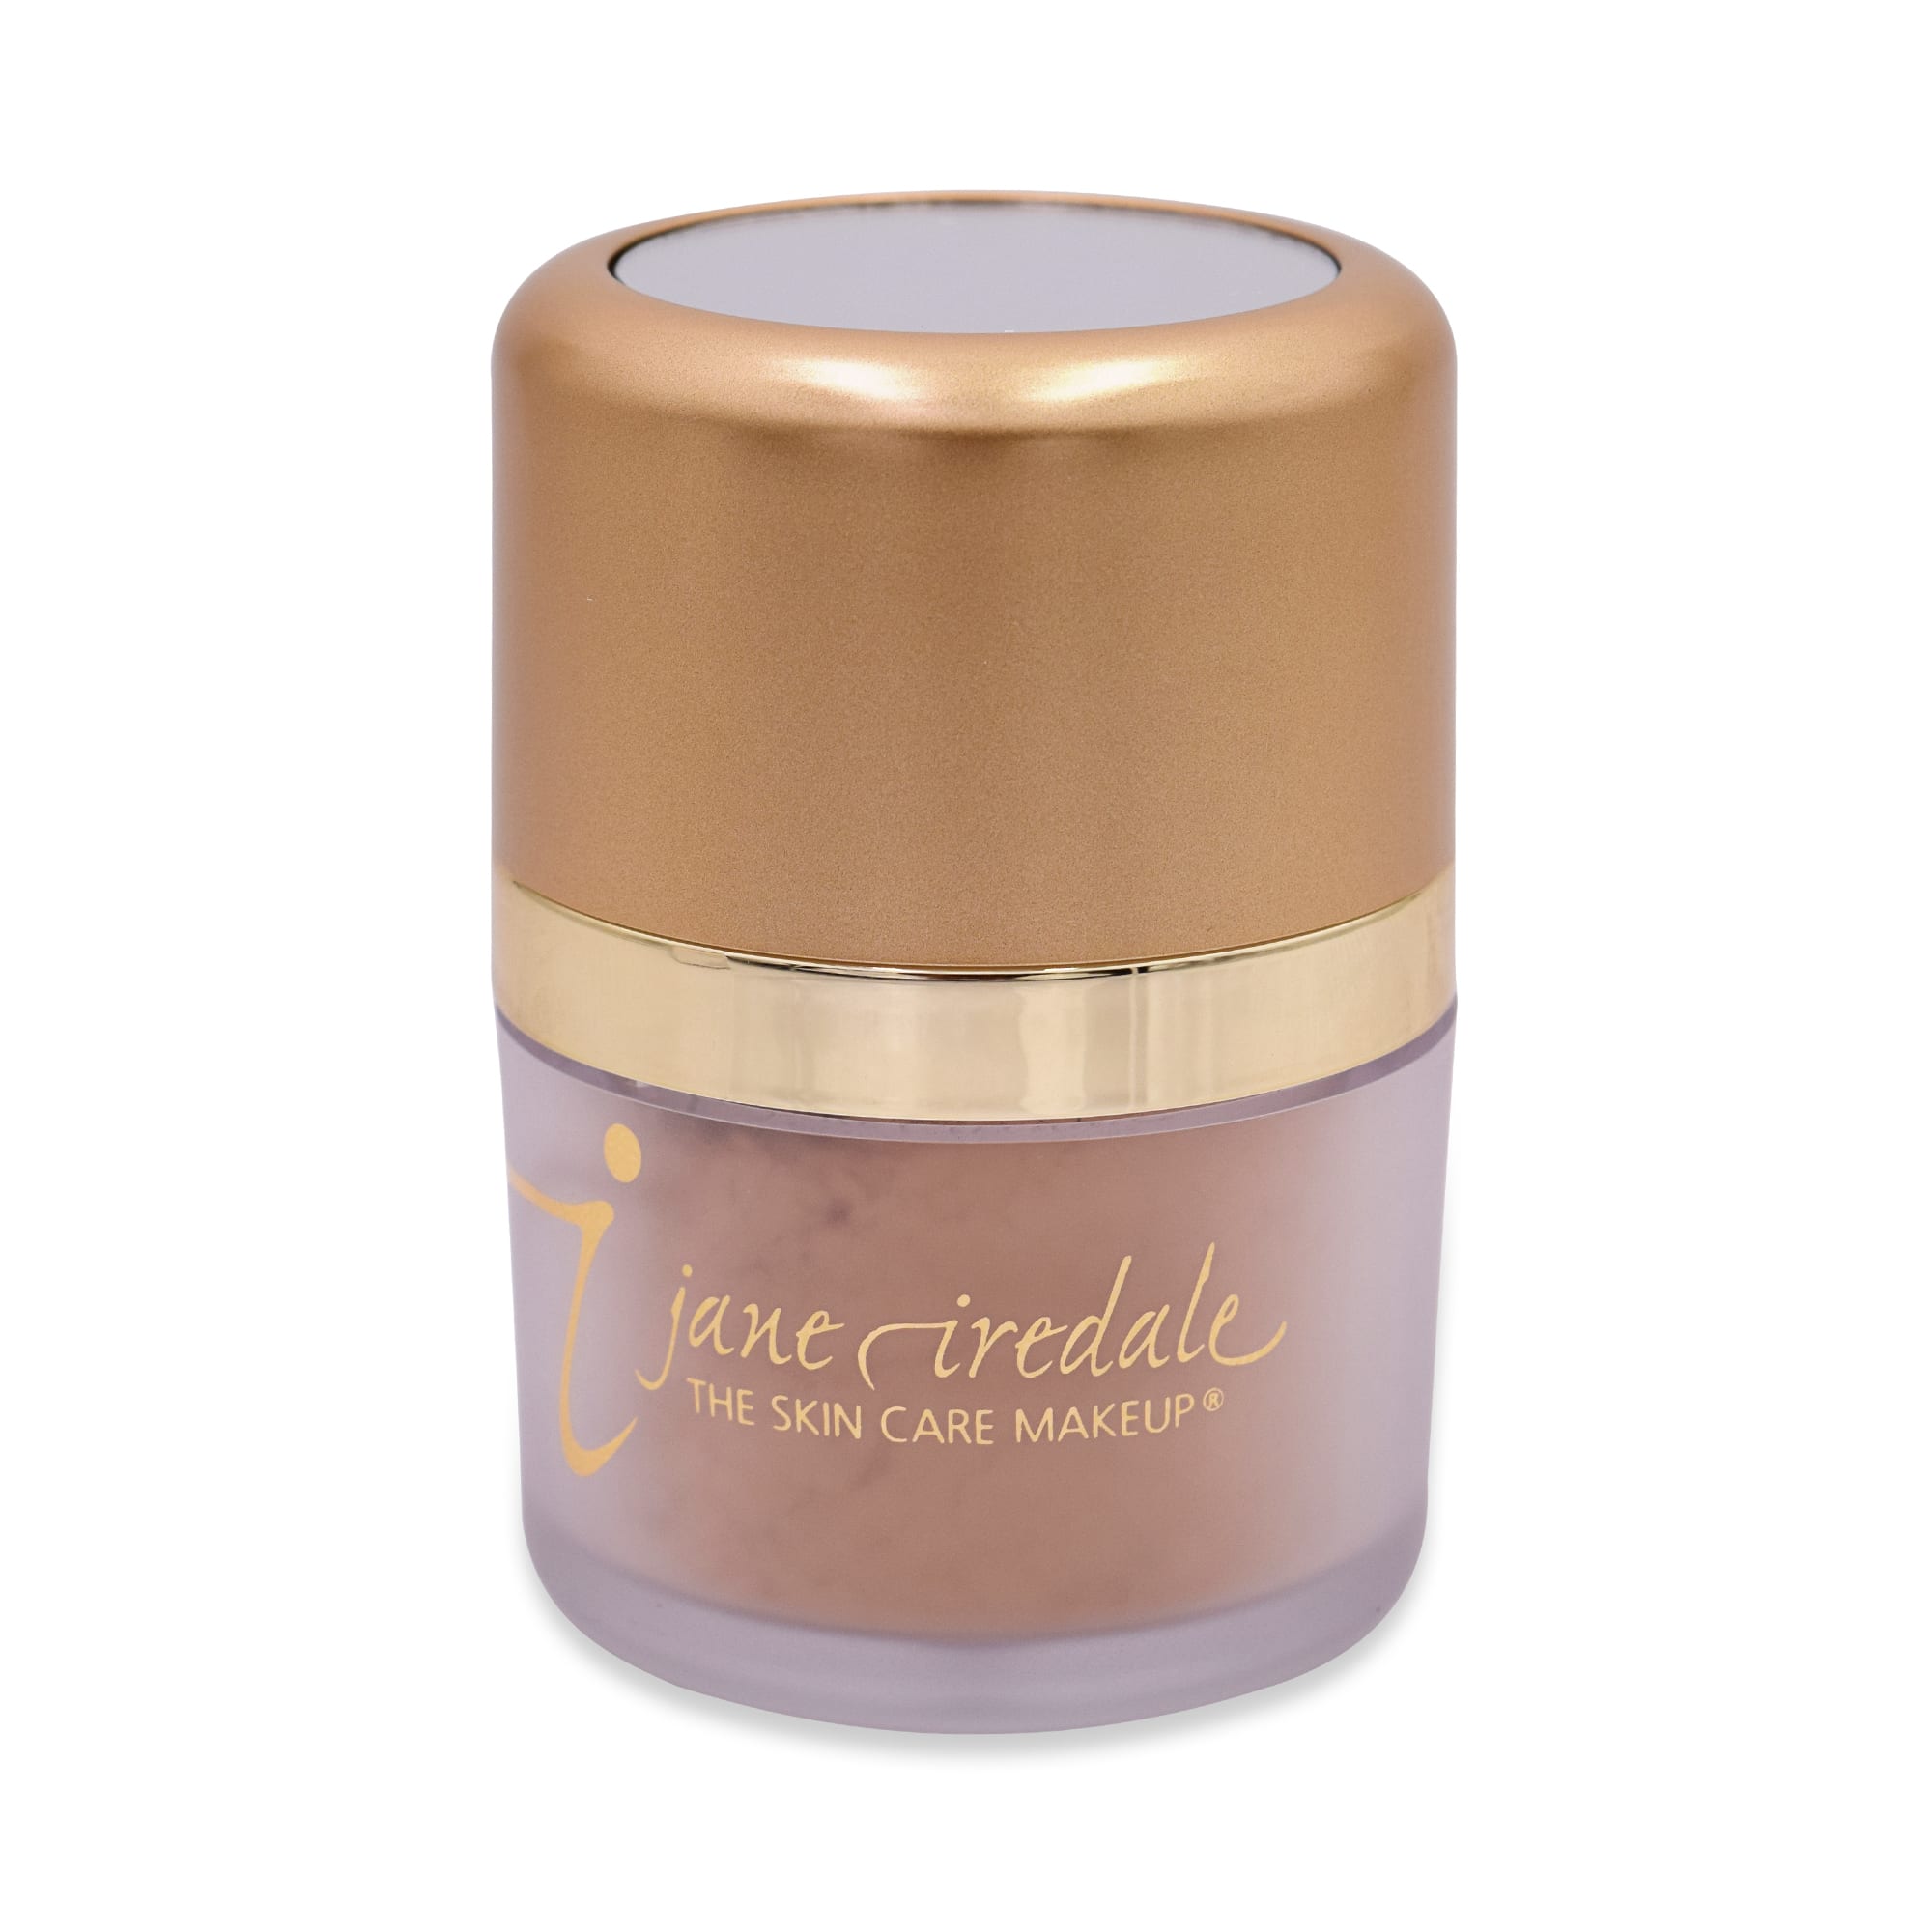 jane iredale Powder-Me SPF Dry Sunscreen Tanned 0.62 oz